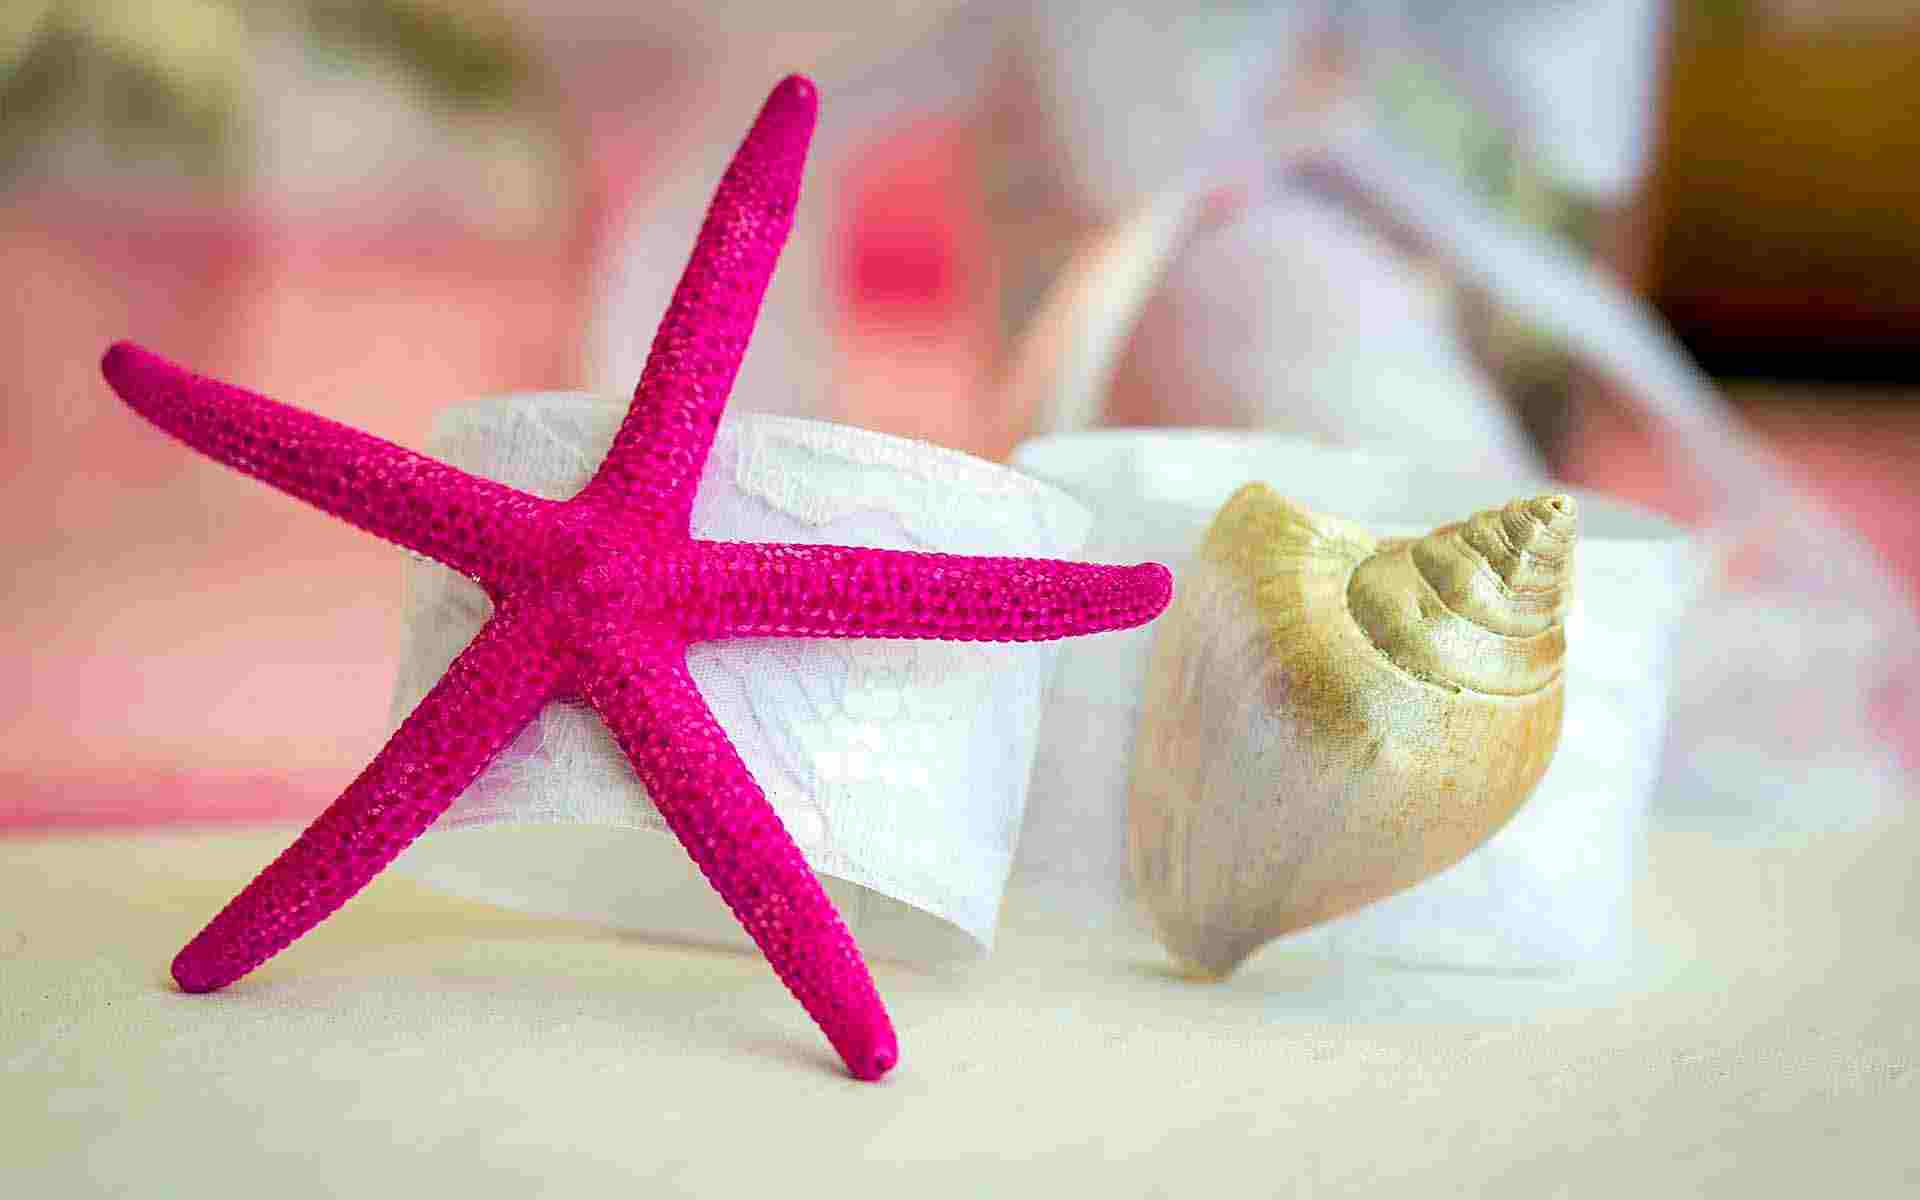 Bonding-Pads-On-The-Sea-Shells-And-Starfish-by-Diamond-Events-christening